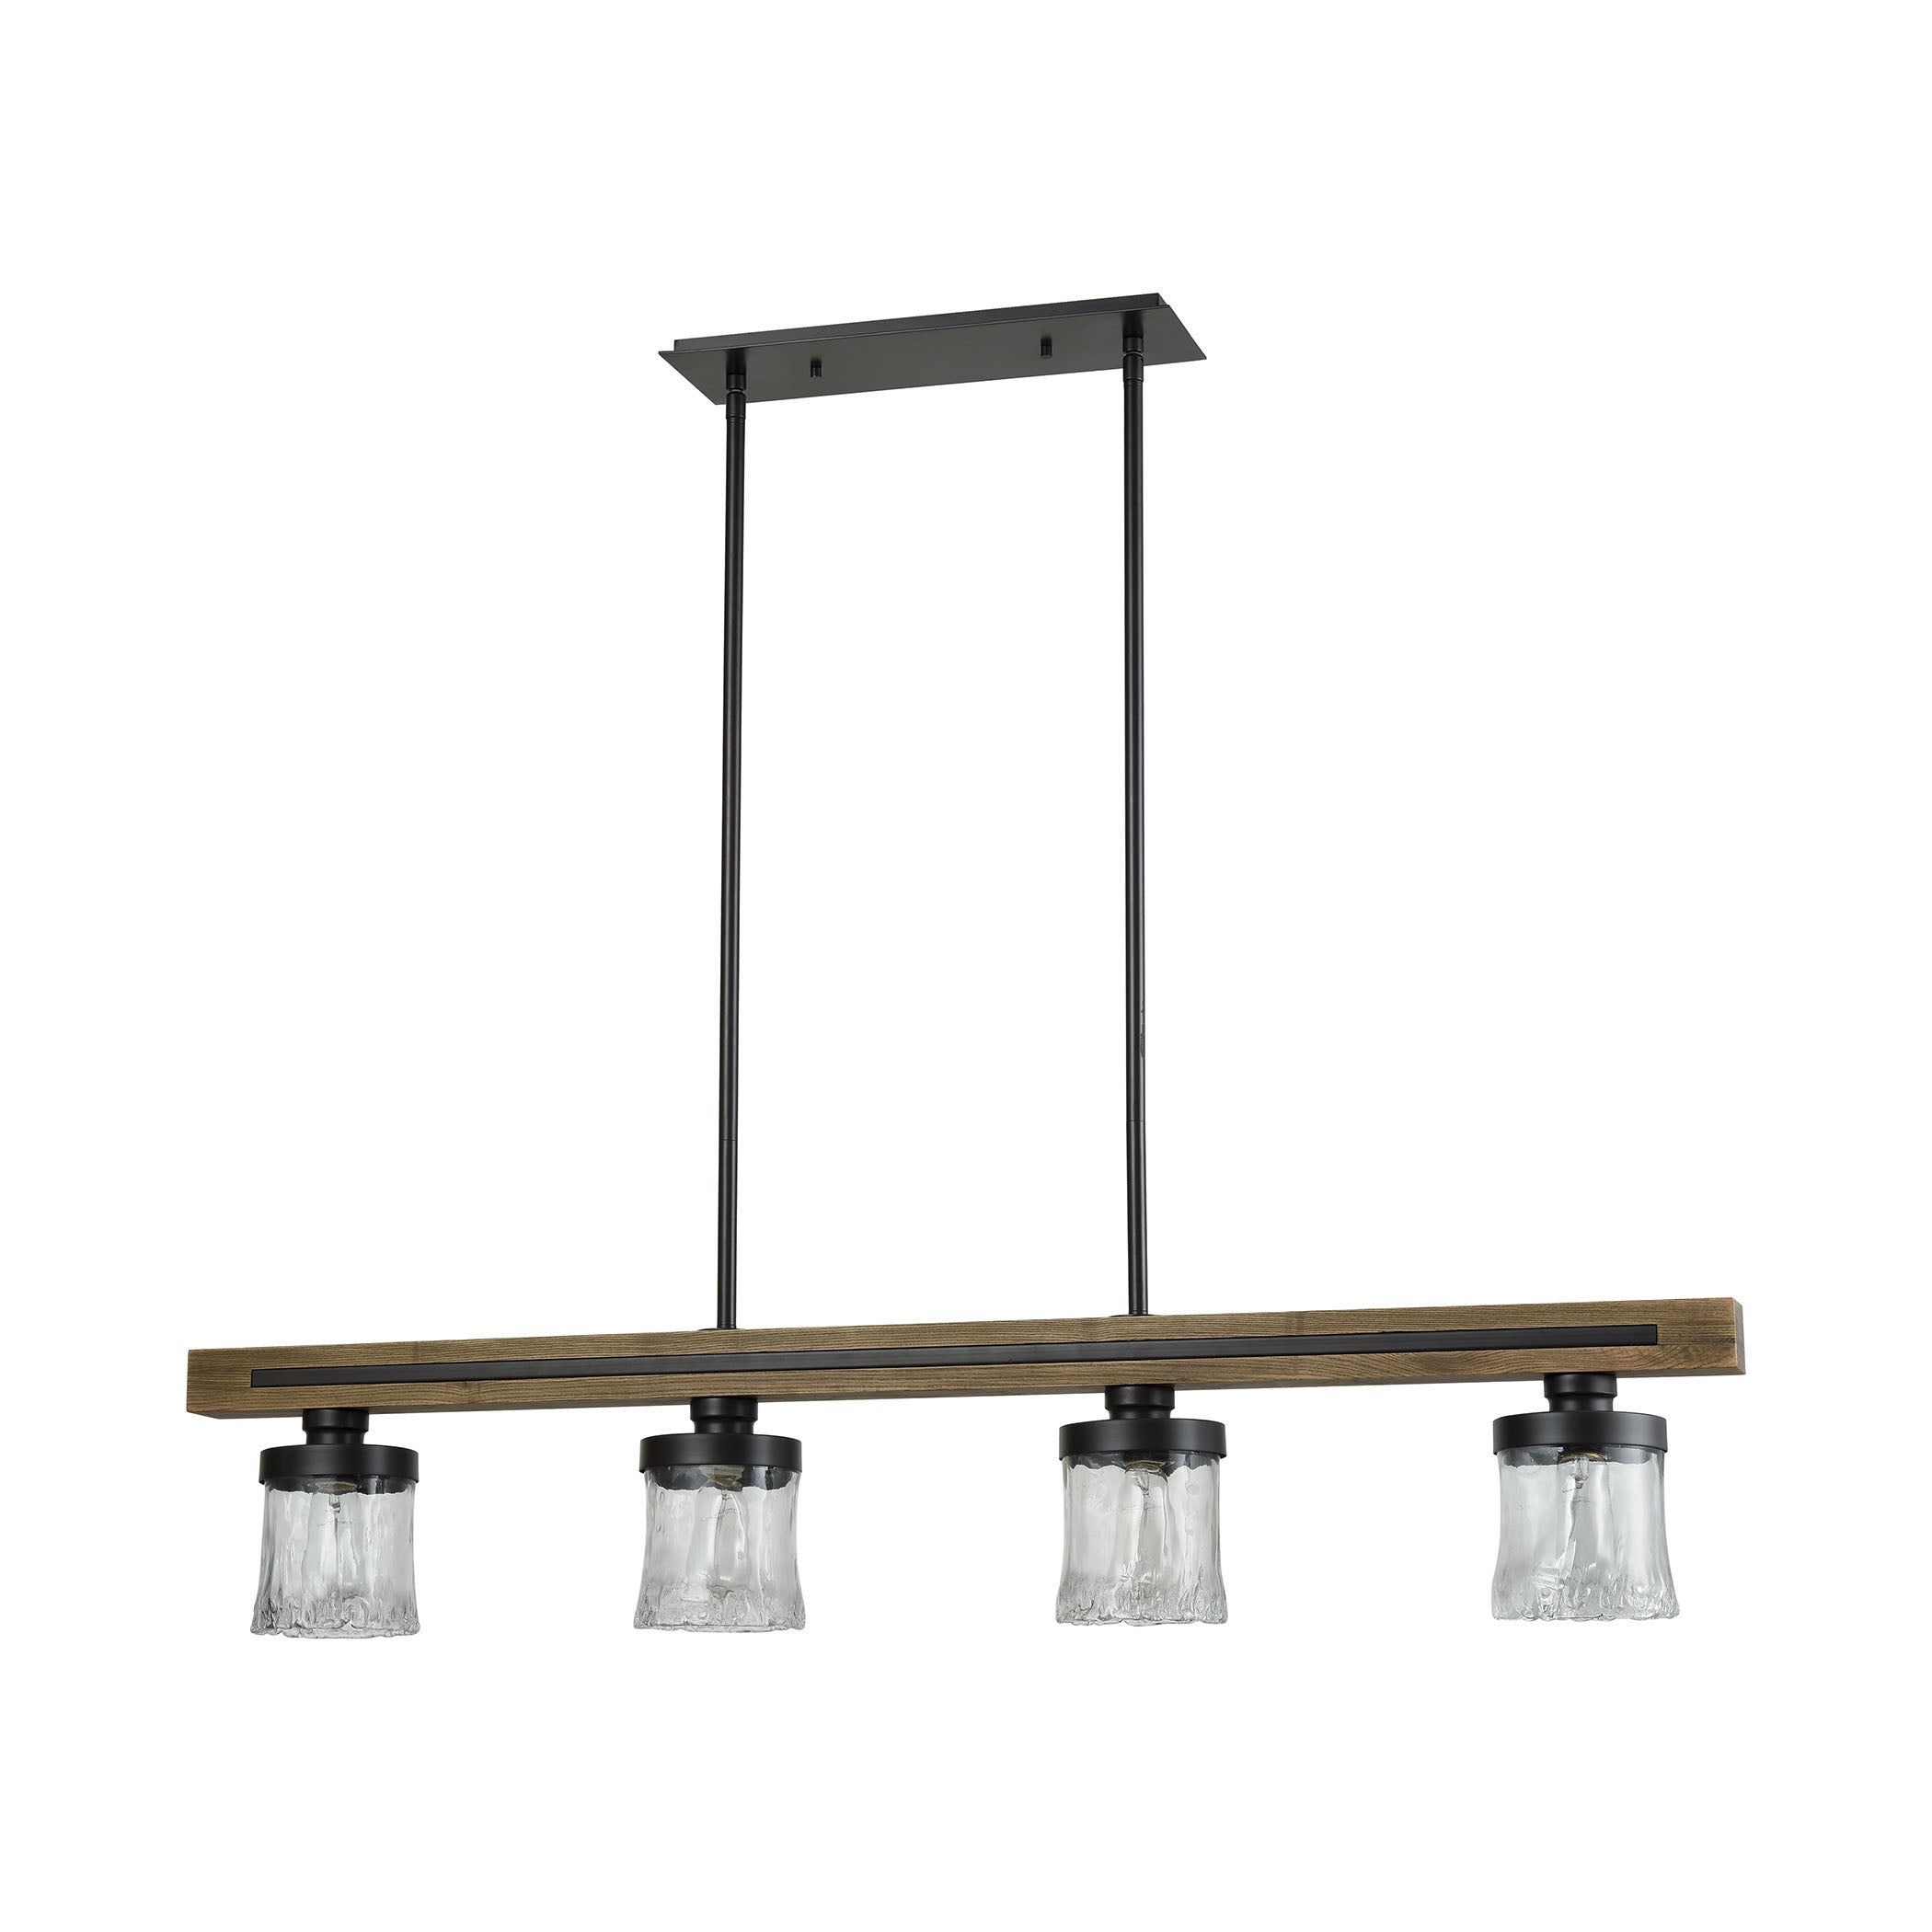 ELK Lighting 33071/4 Timberwood 4-Light Island Light in Oil Rubbed Bronze with Clear Hand-formed Glass